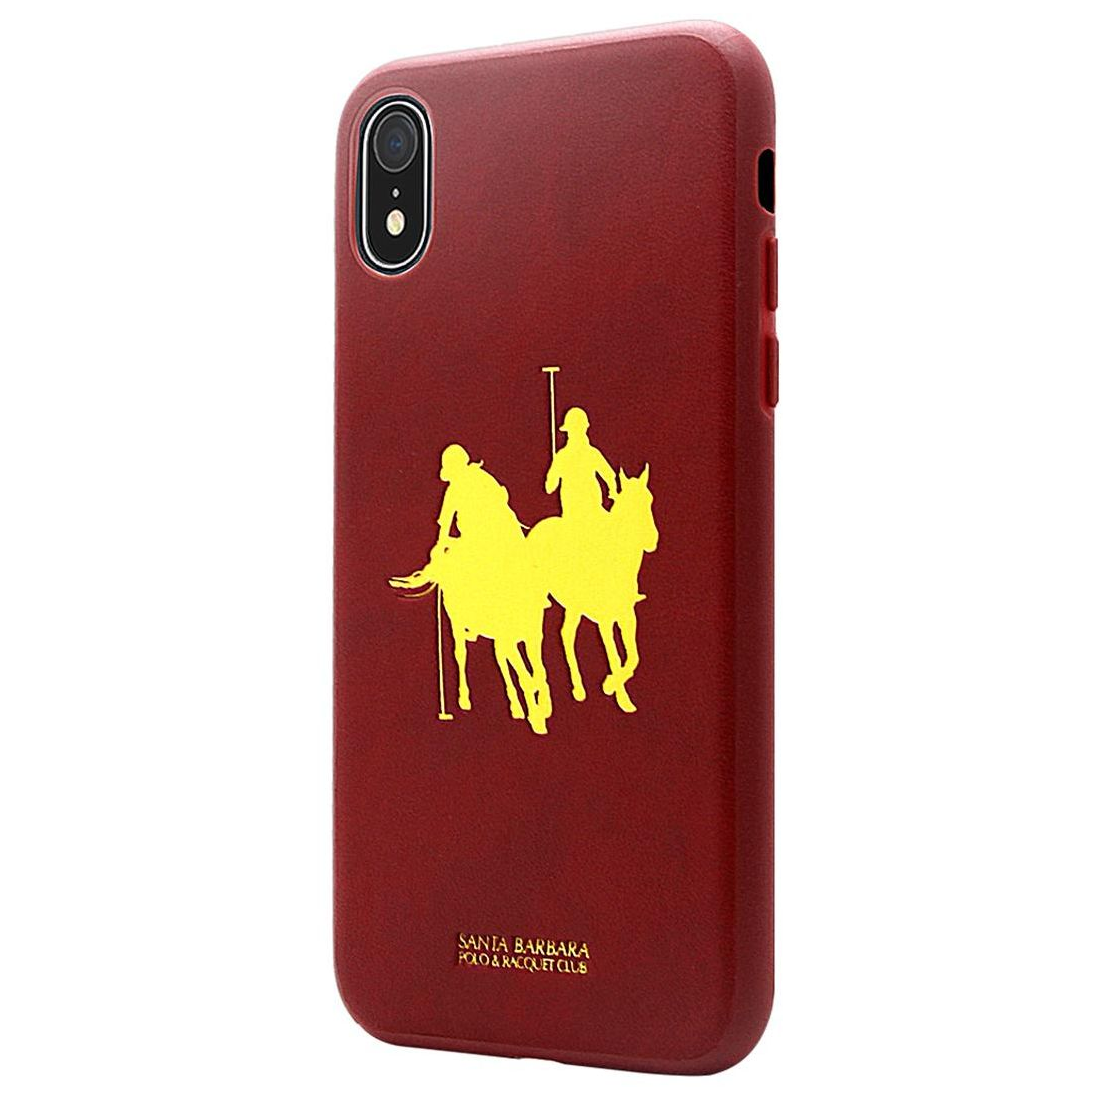 Luxury Santa Barbara Polo & Racquet Club Genuine Leather Hard Back Case Cover for Apple iPhone XR (6.1")